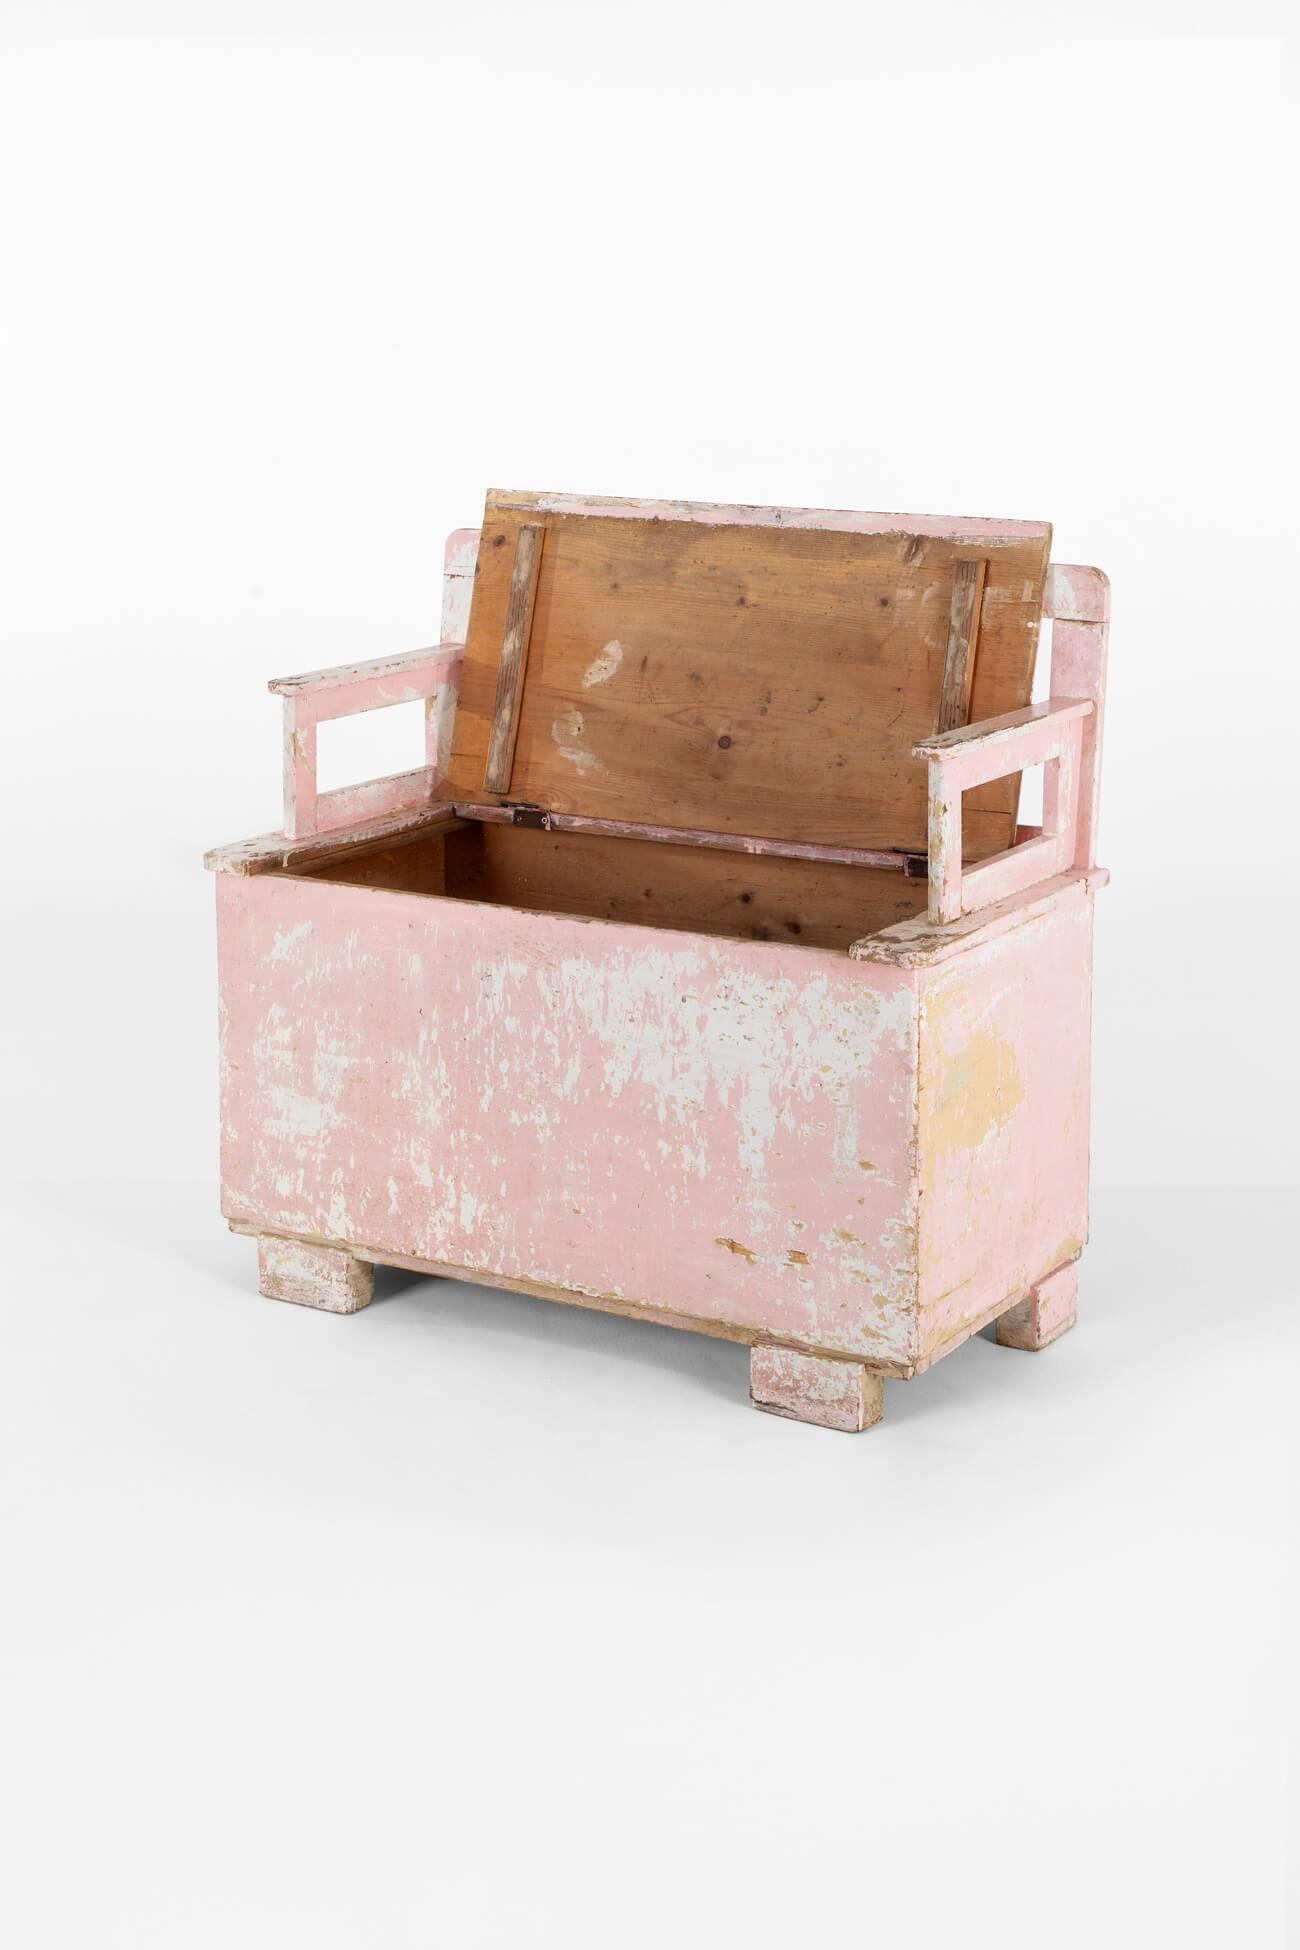 A charming box bench of diminutive proportions in pine with remnants of white and pink paint on the seat and sides.

The ample-sized box has a slatted backrest and two low arms and is raised on four block sturdy block feet.

The bench is very